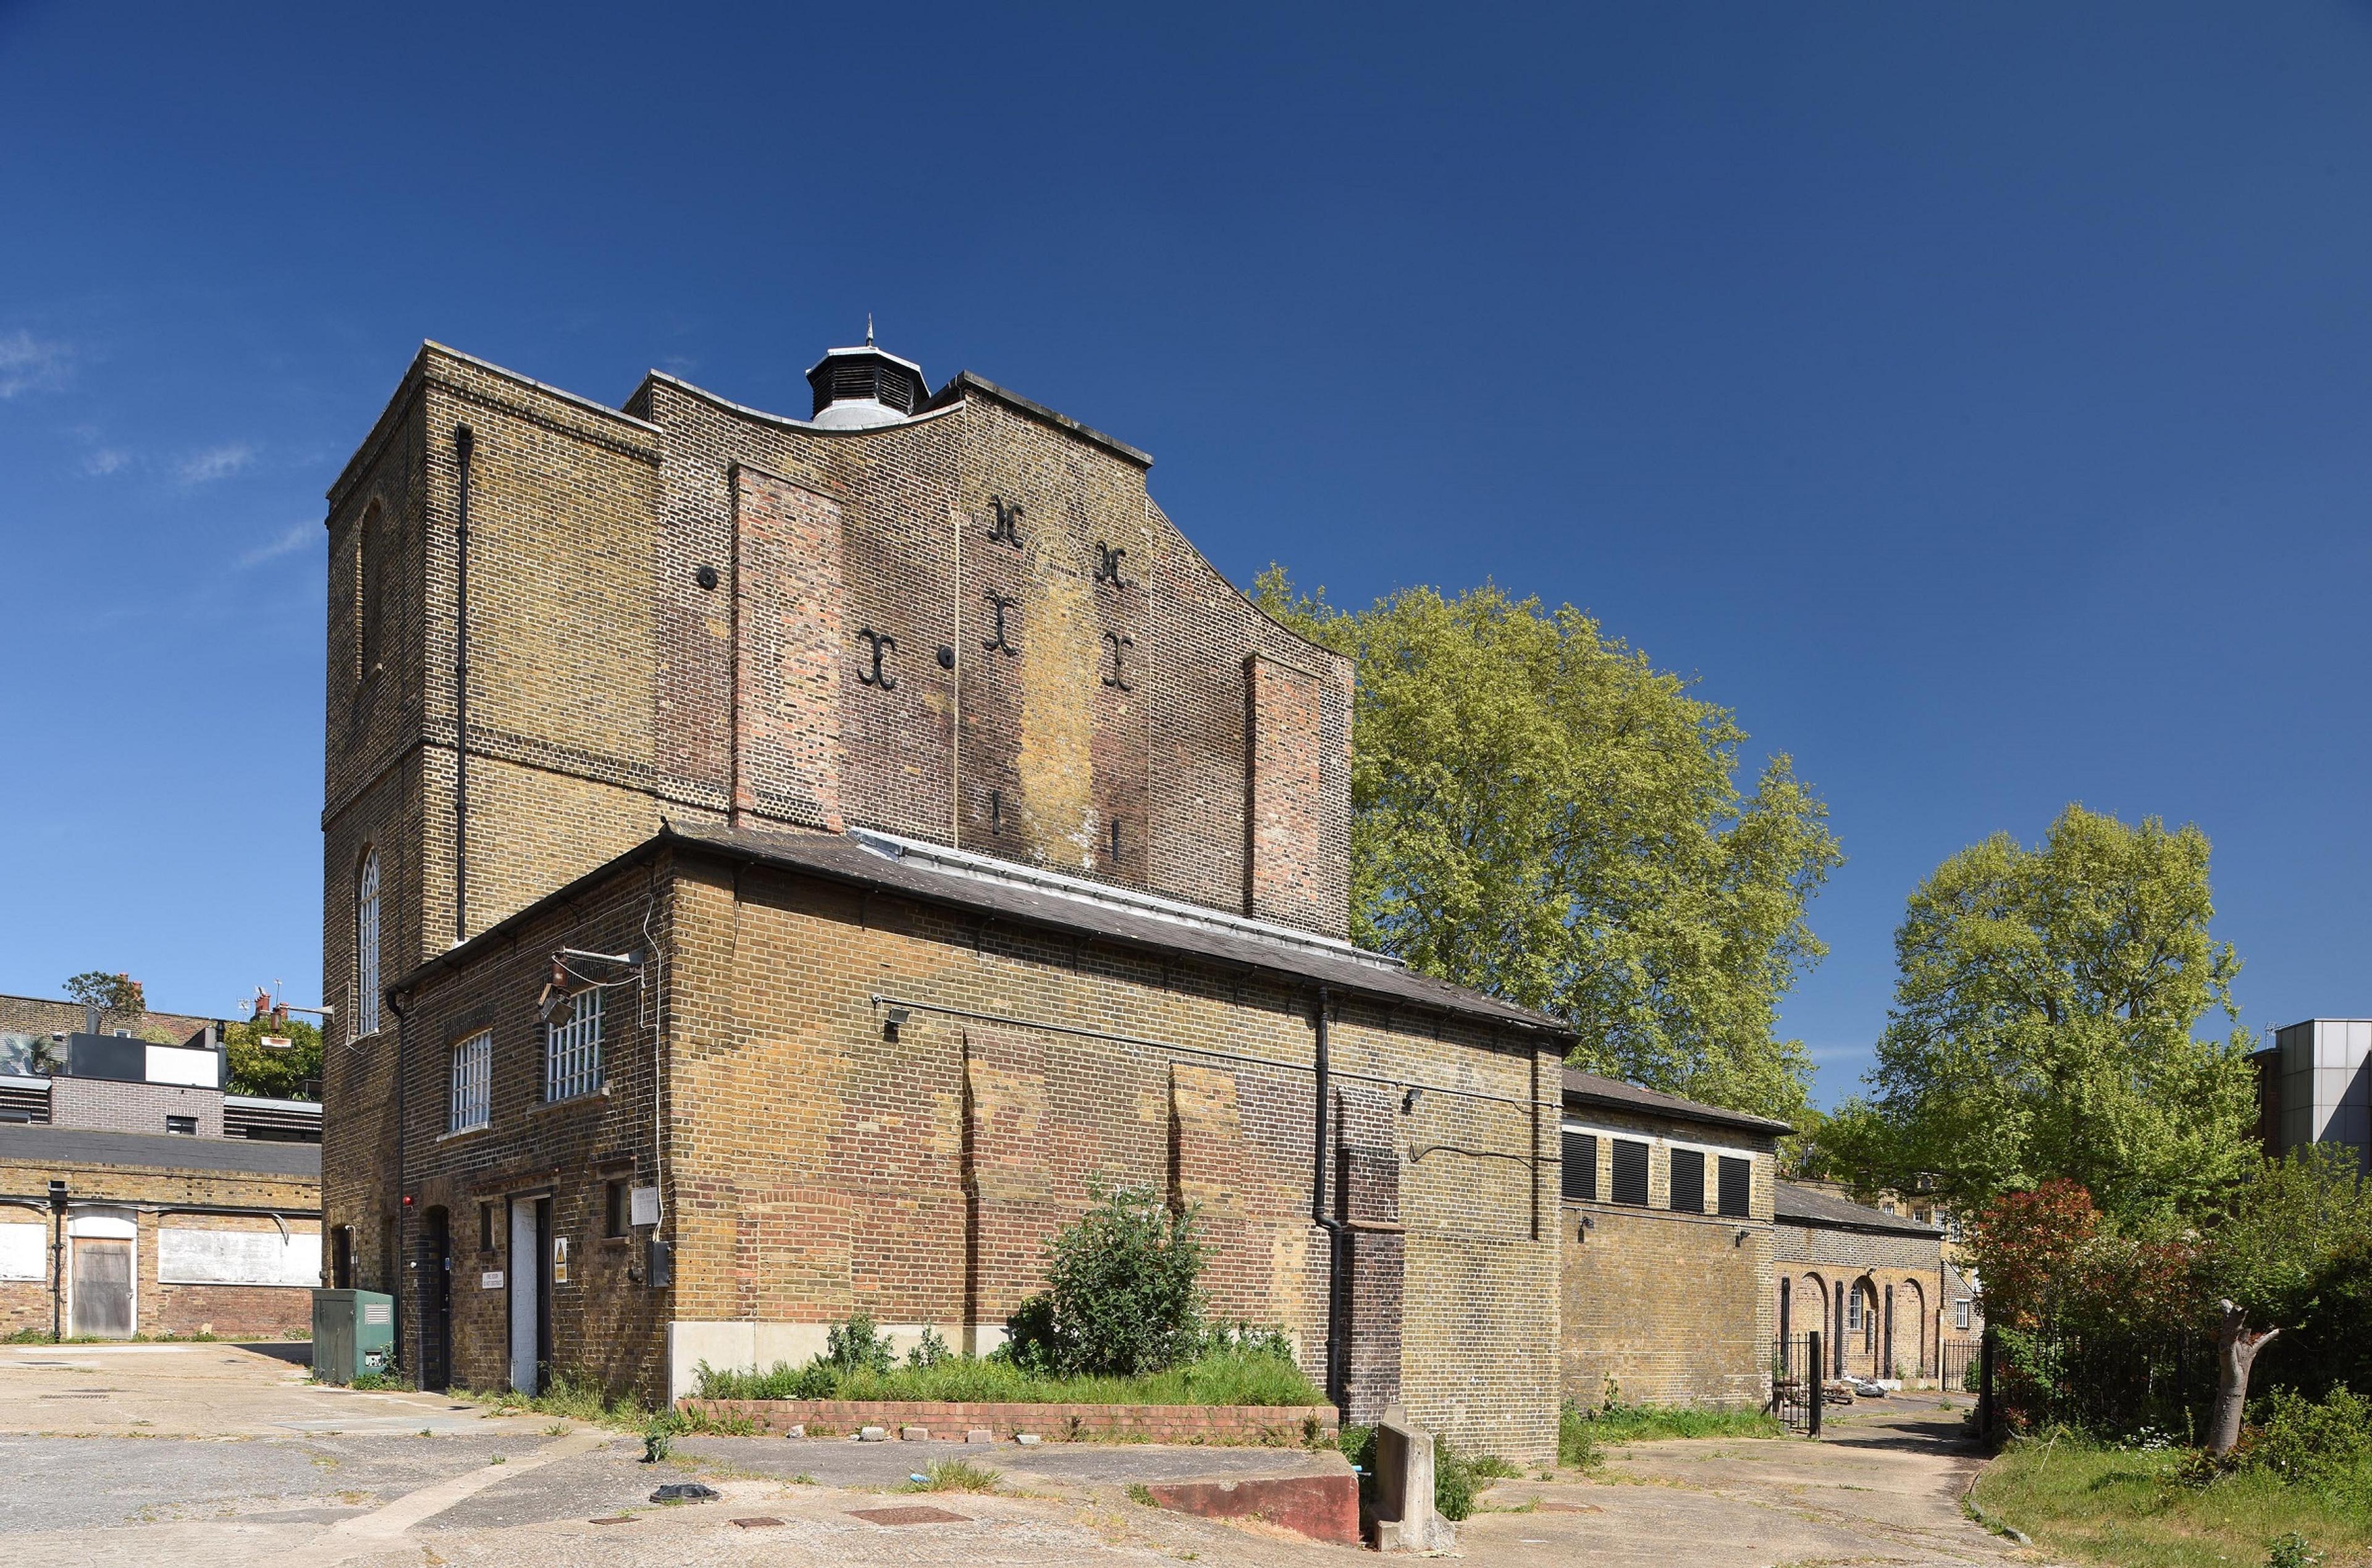 Industrial brick building with blue sky above